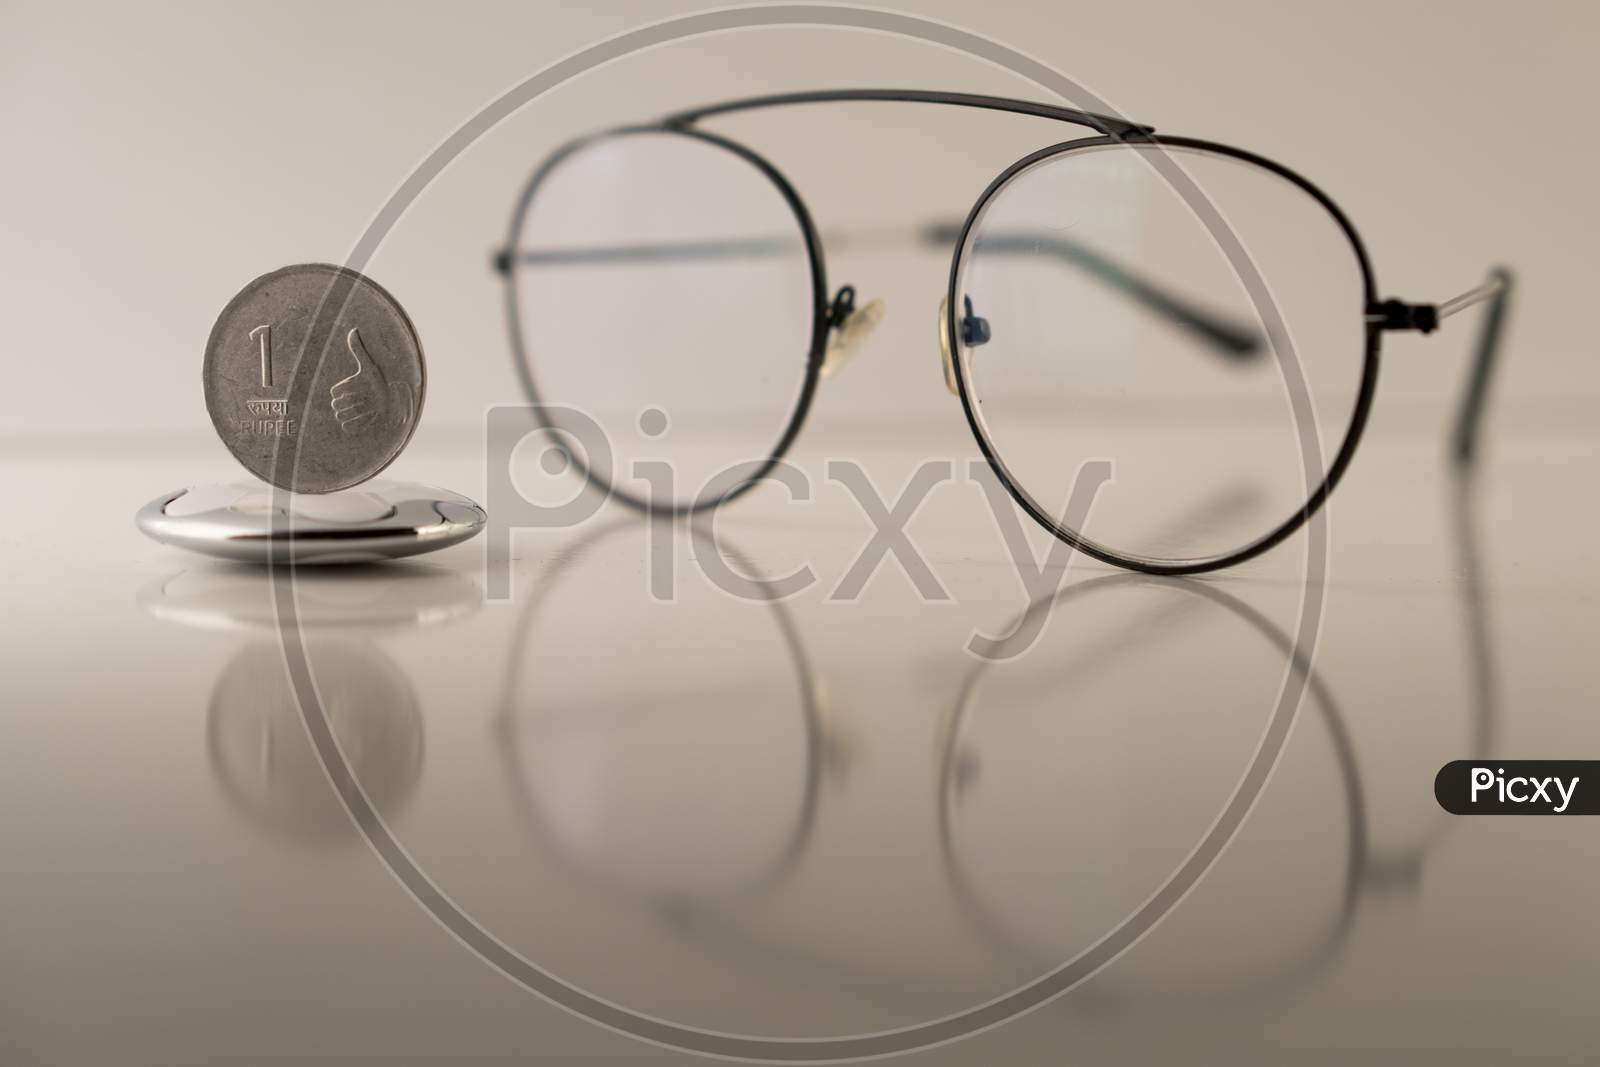 Indian rupee with spectacle against a white background . the image portrays the concept of value of Indian currency through the glasses of economist